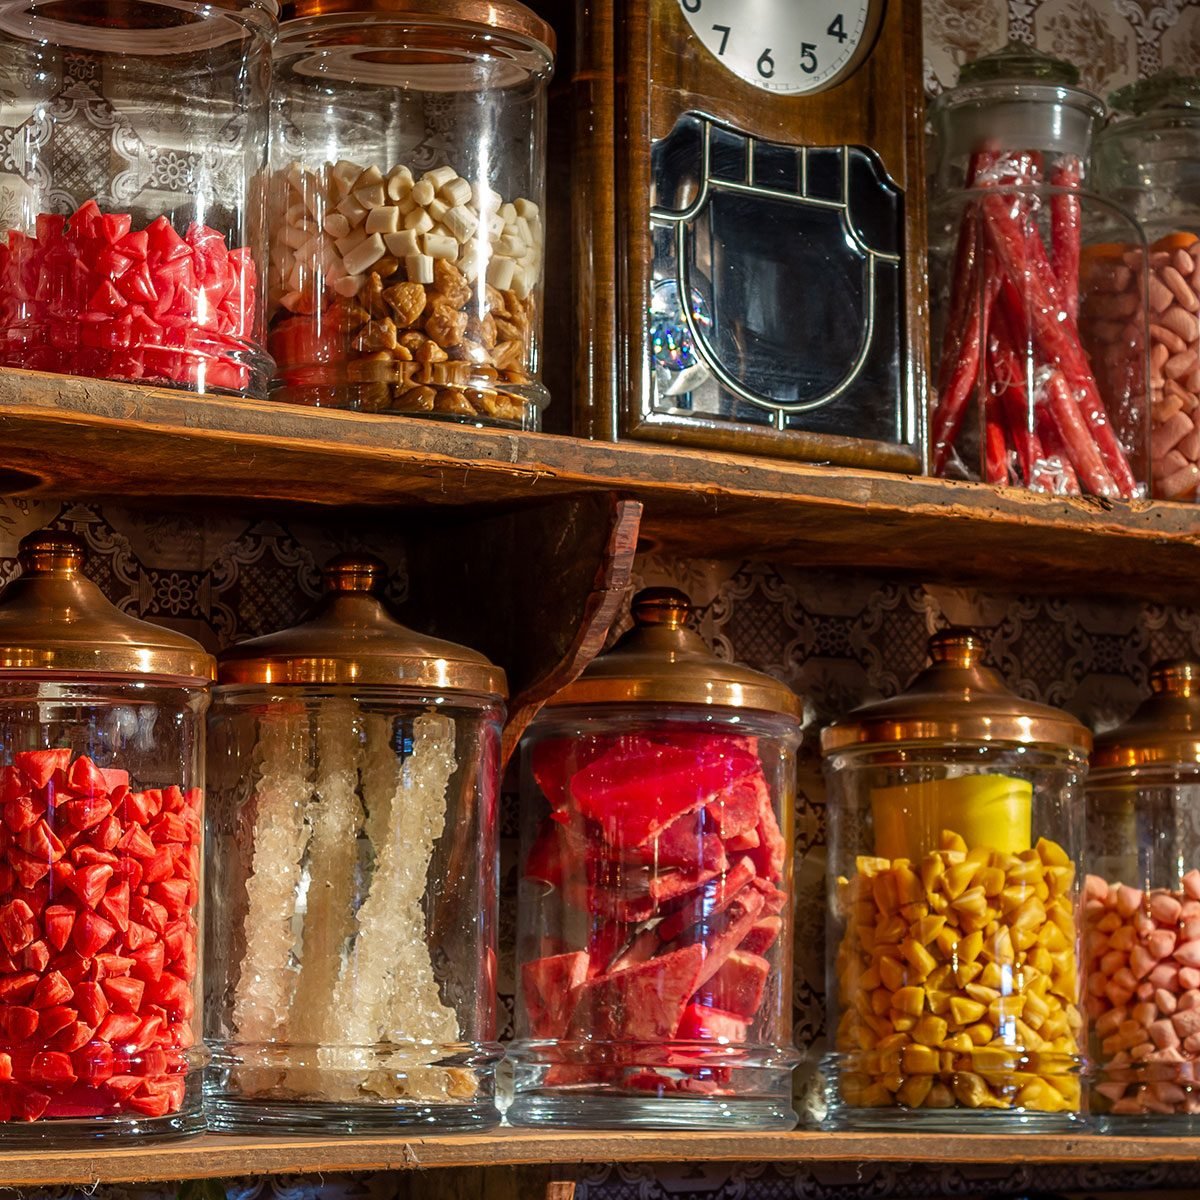 https://www.tasteofhome.com/wp-content/uploads/2019/02/old-candy-store-colorful-candies-in-jars-1174876747.jpg